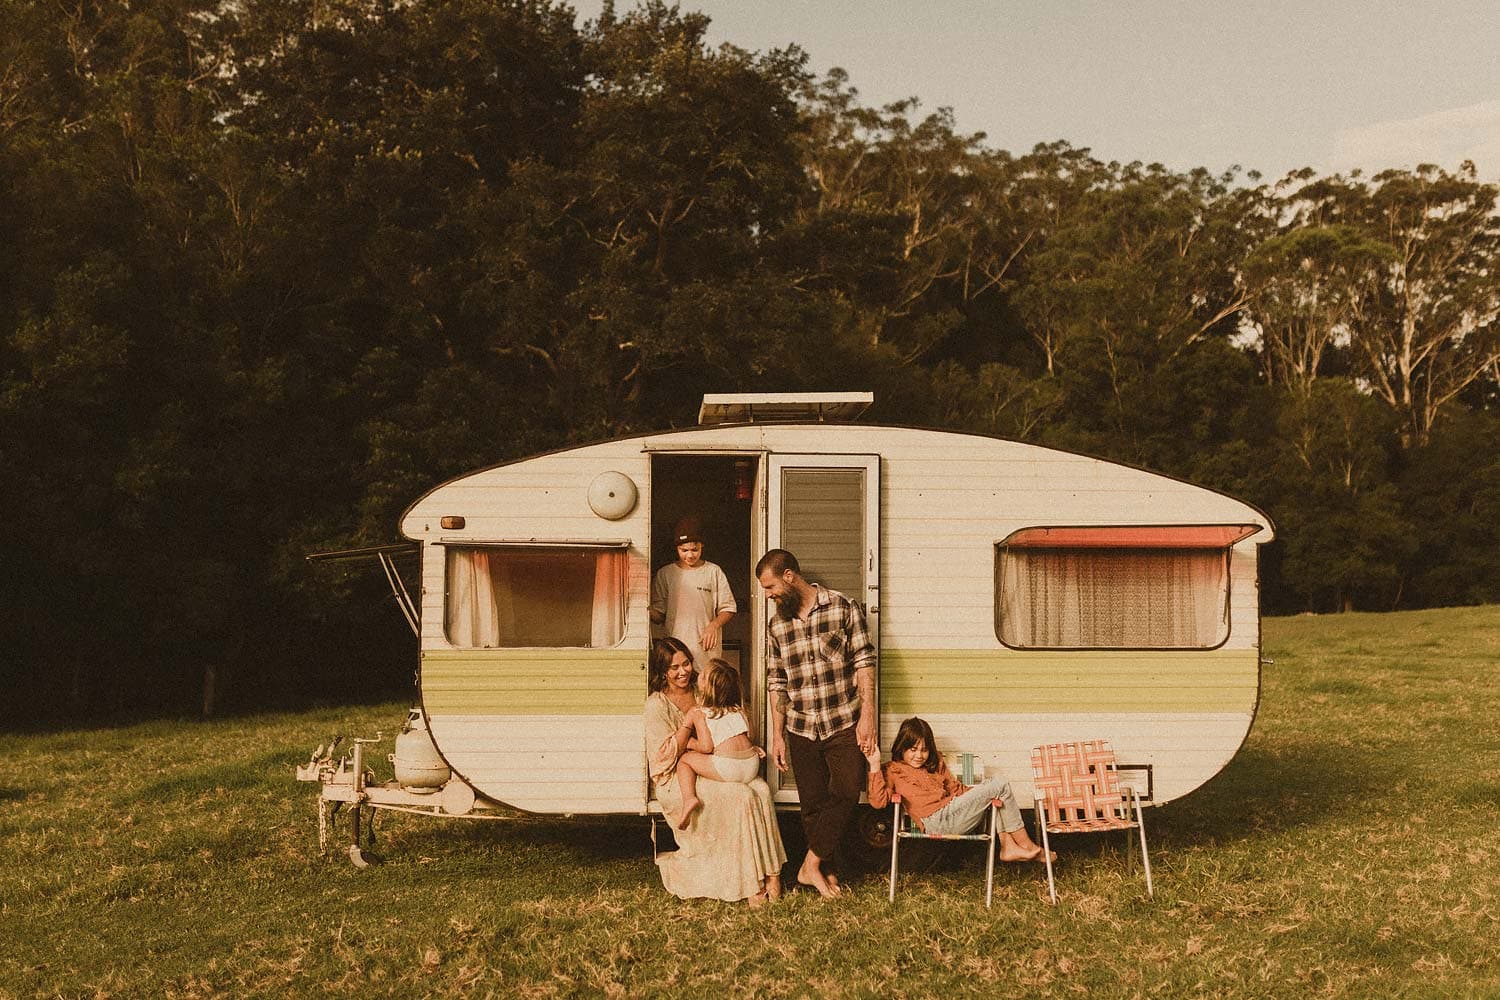 Family-photography-sydney-family-of-five-camping-in-retro-caravan-in-meadow